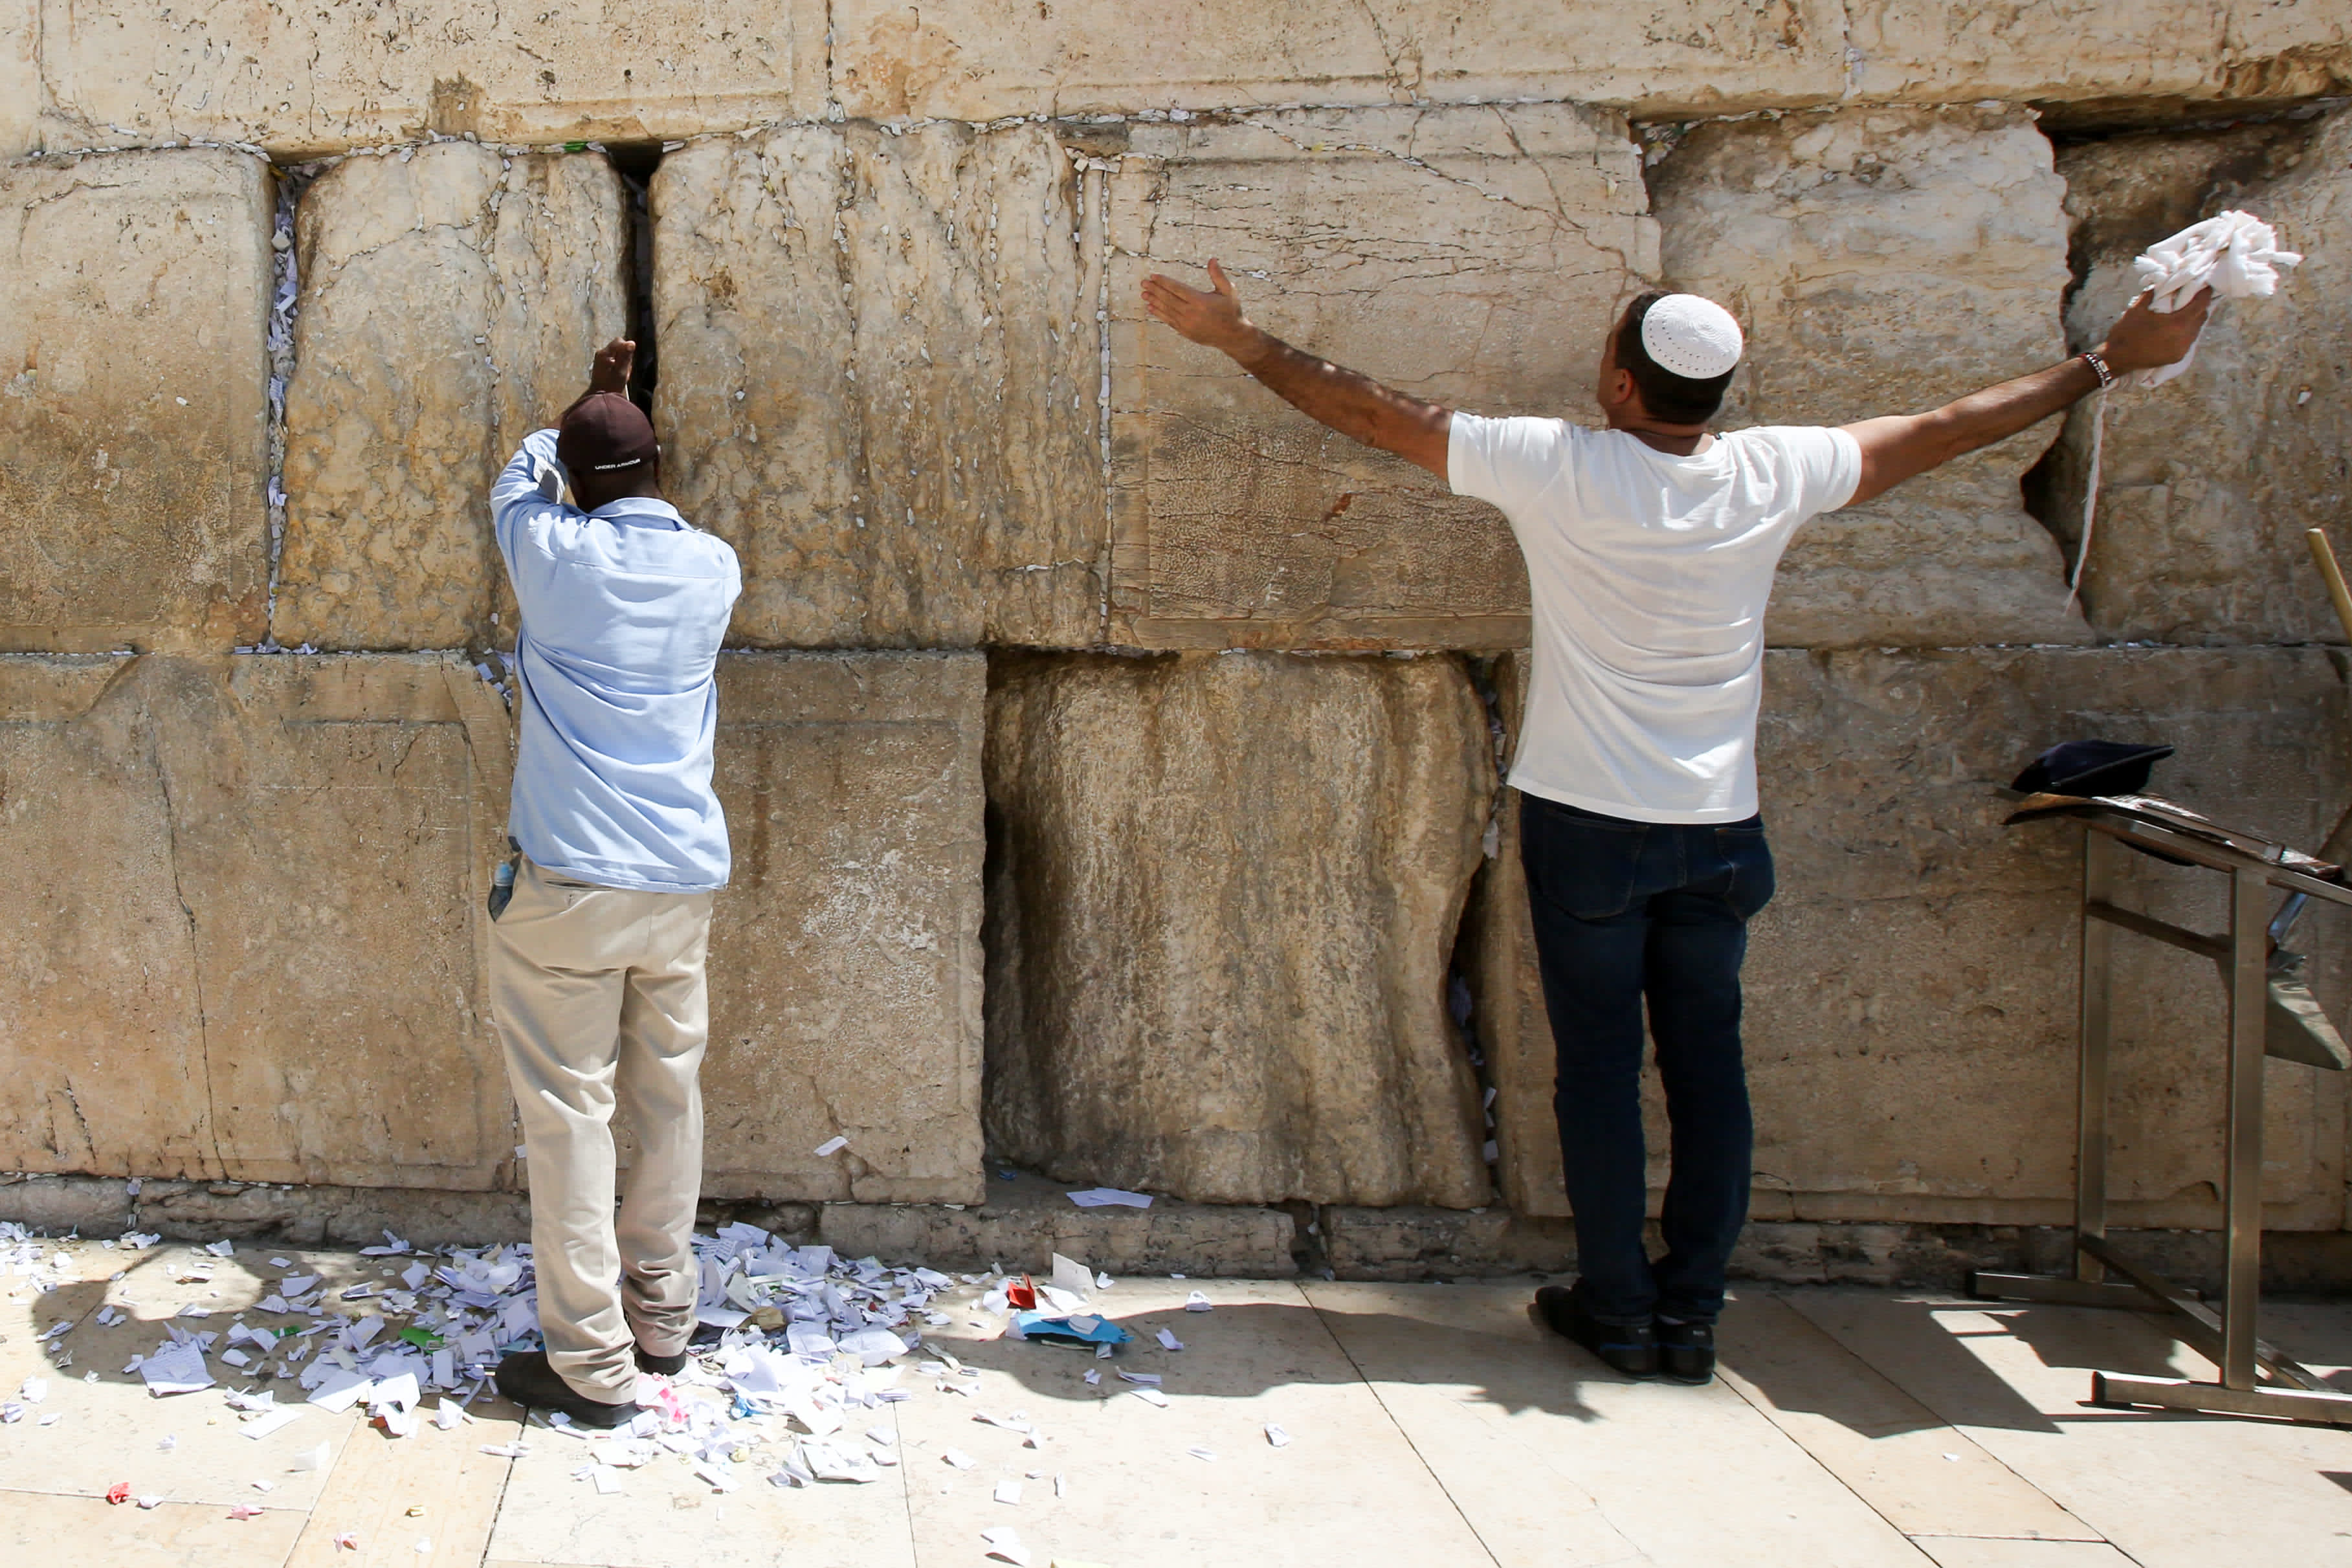 Man prays while another cleans out Western Wall notes